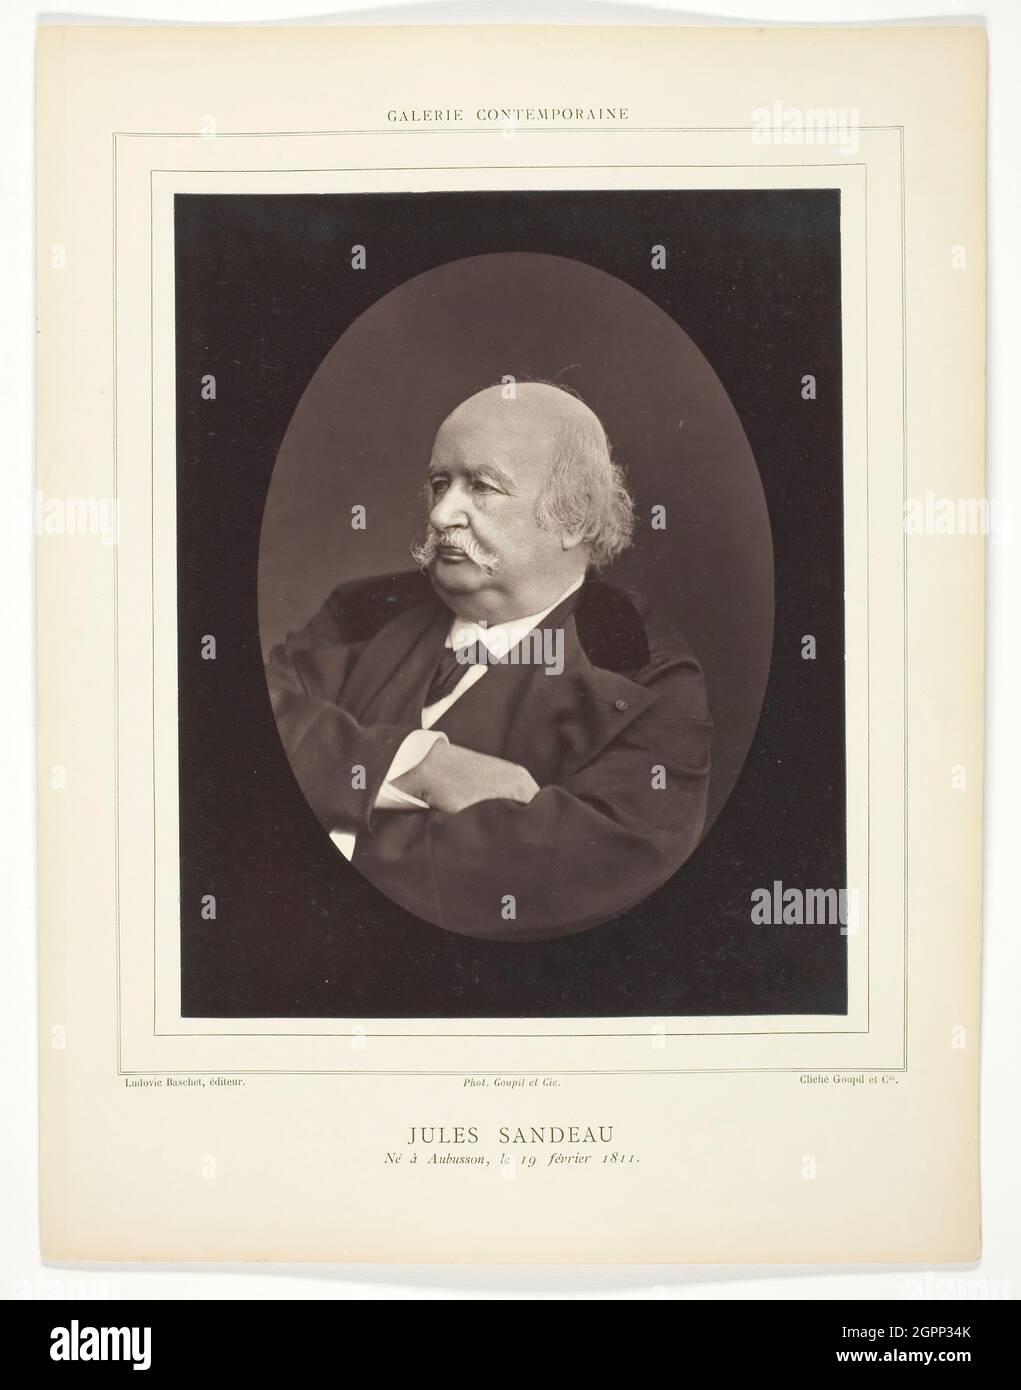 Jules Sandeau, [French writer], c. 1880. Woodburytype, from the periodical &quot;Galerie Contemporaine Litt&#xe9;raire, Artistique&quot;. Stock Photo